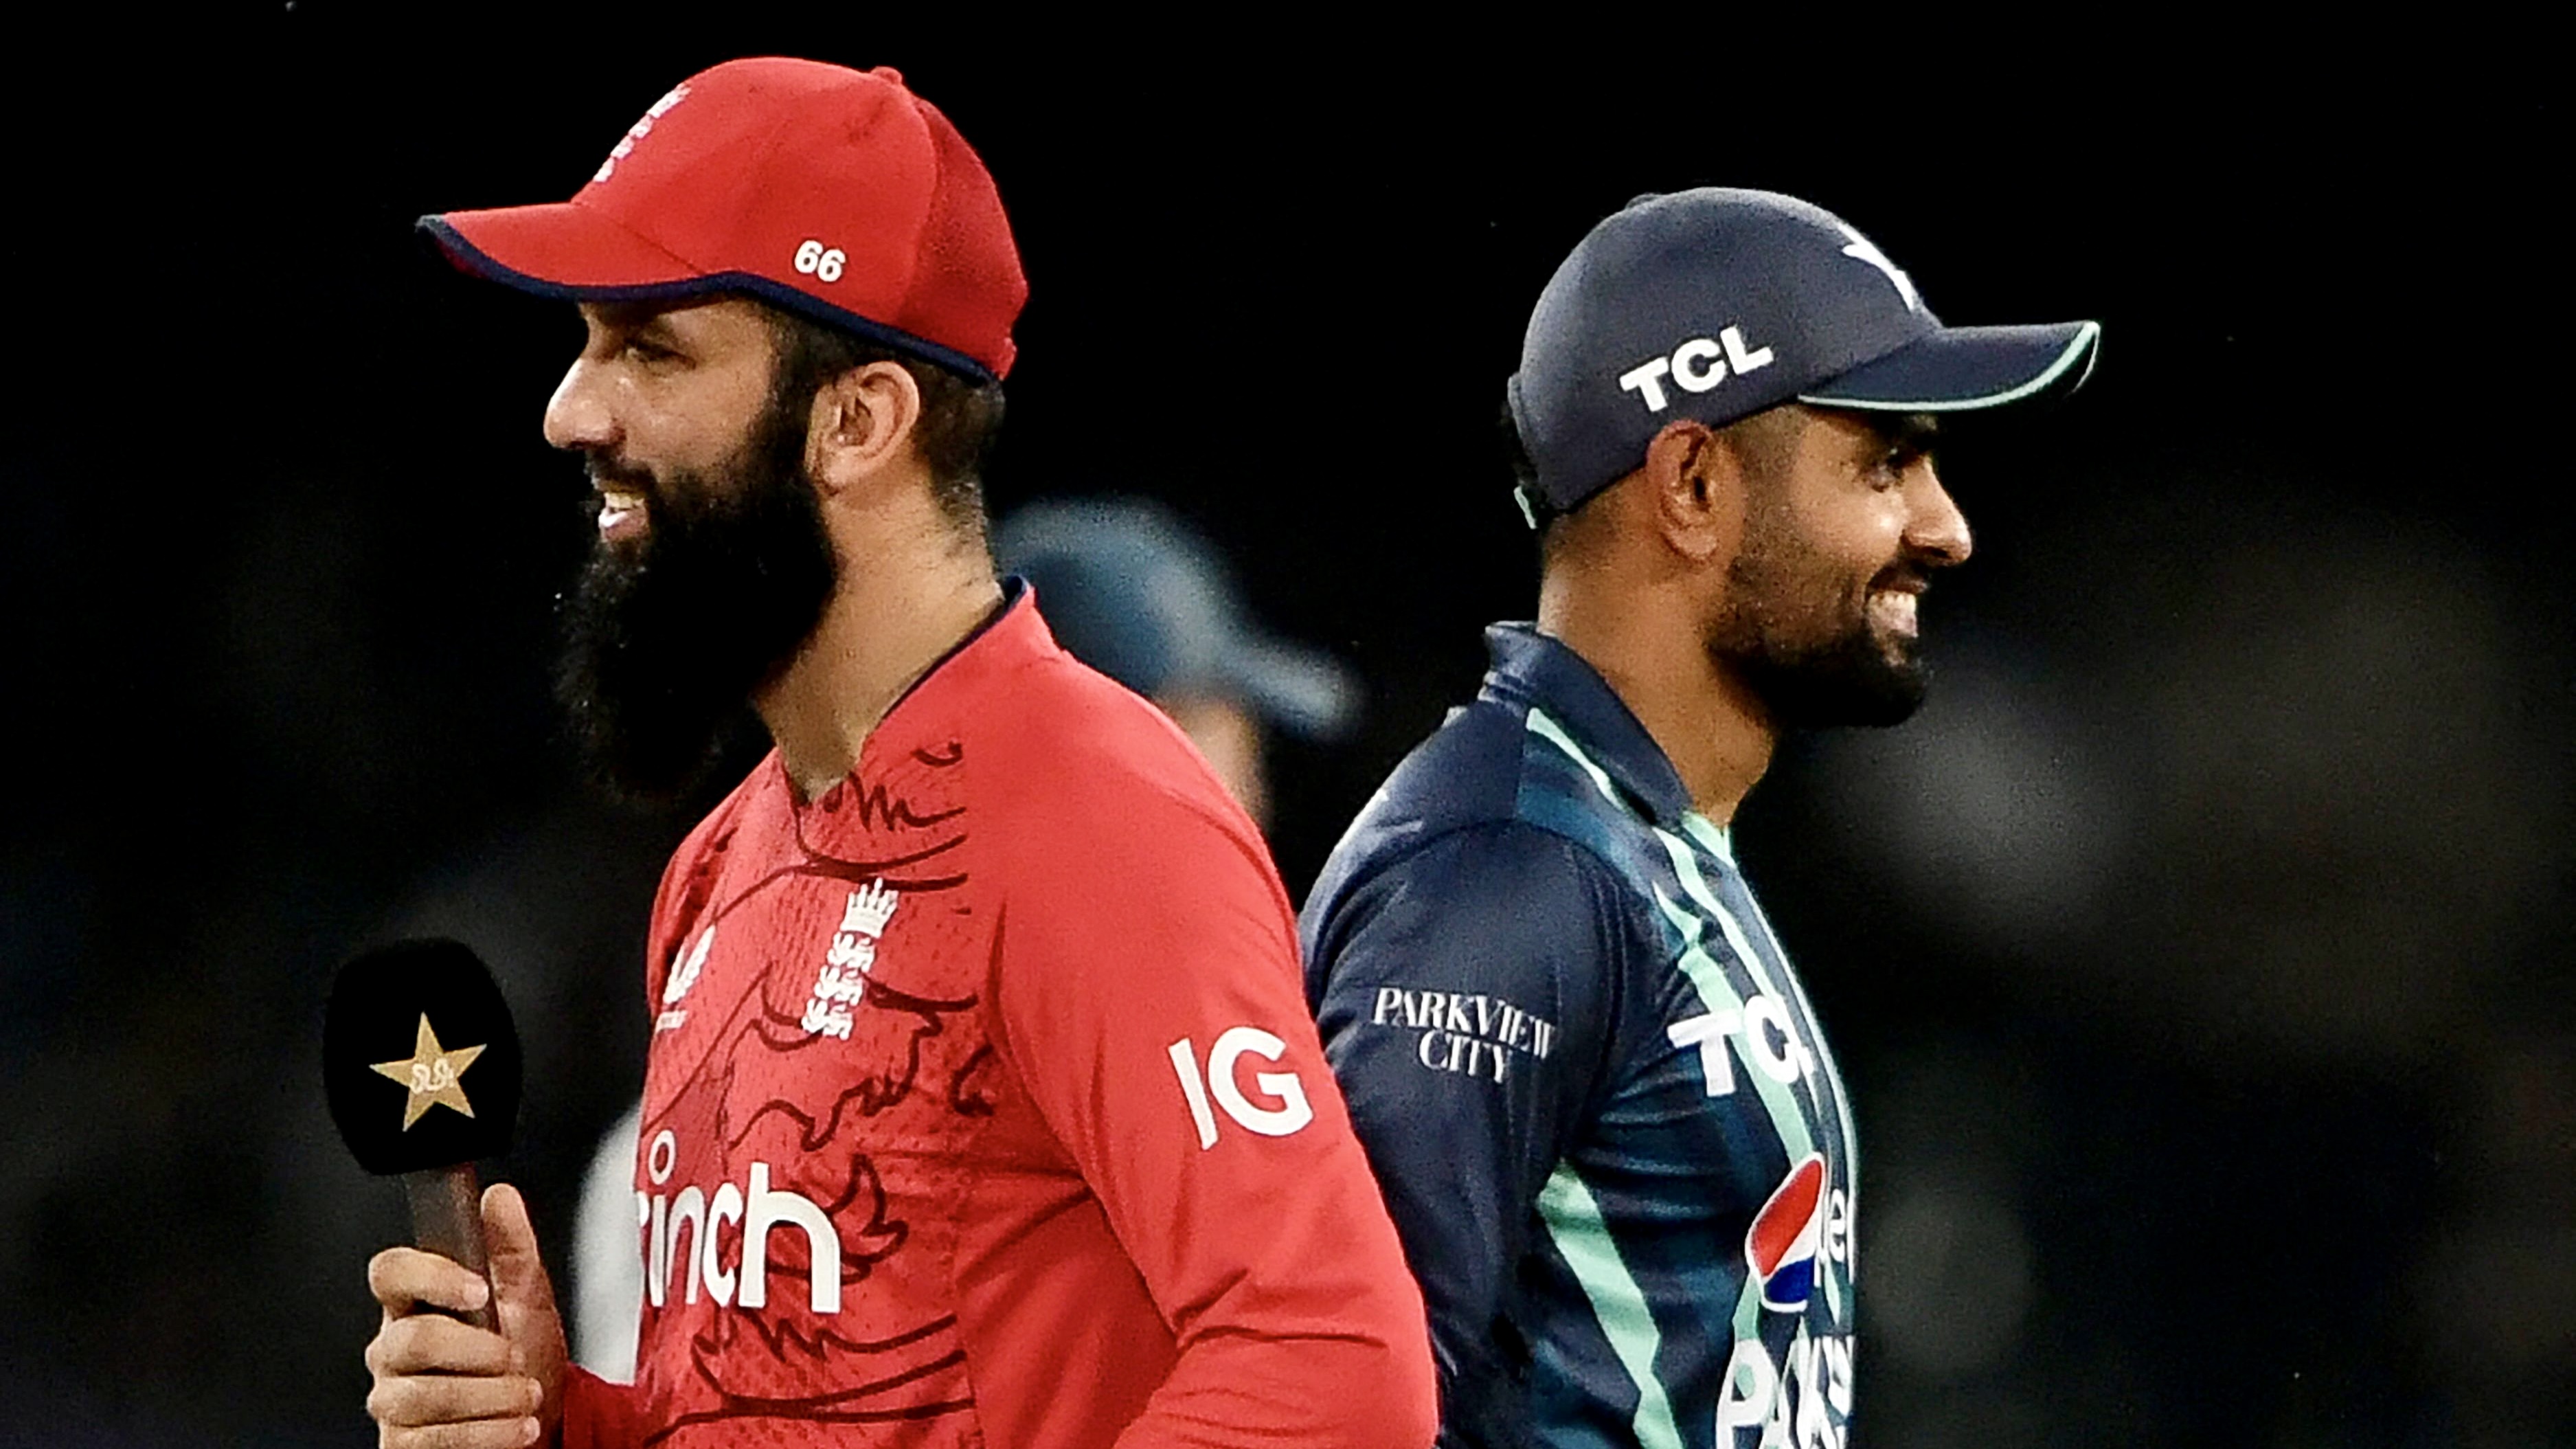 England just destroyed Pakistan to clinch their 7-match T20i cricket series T3